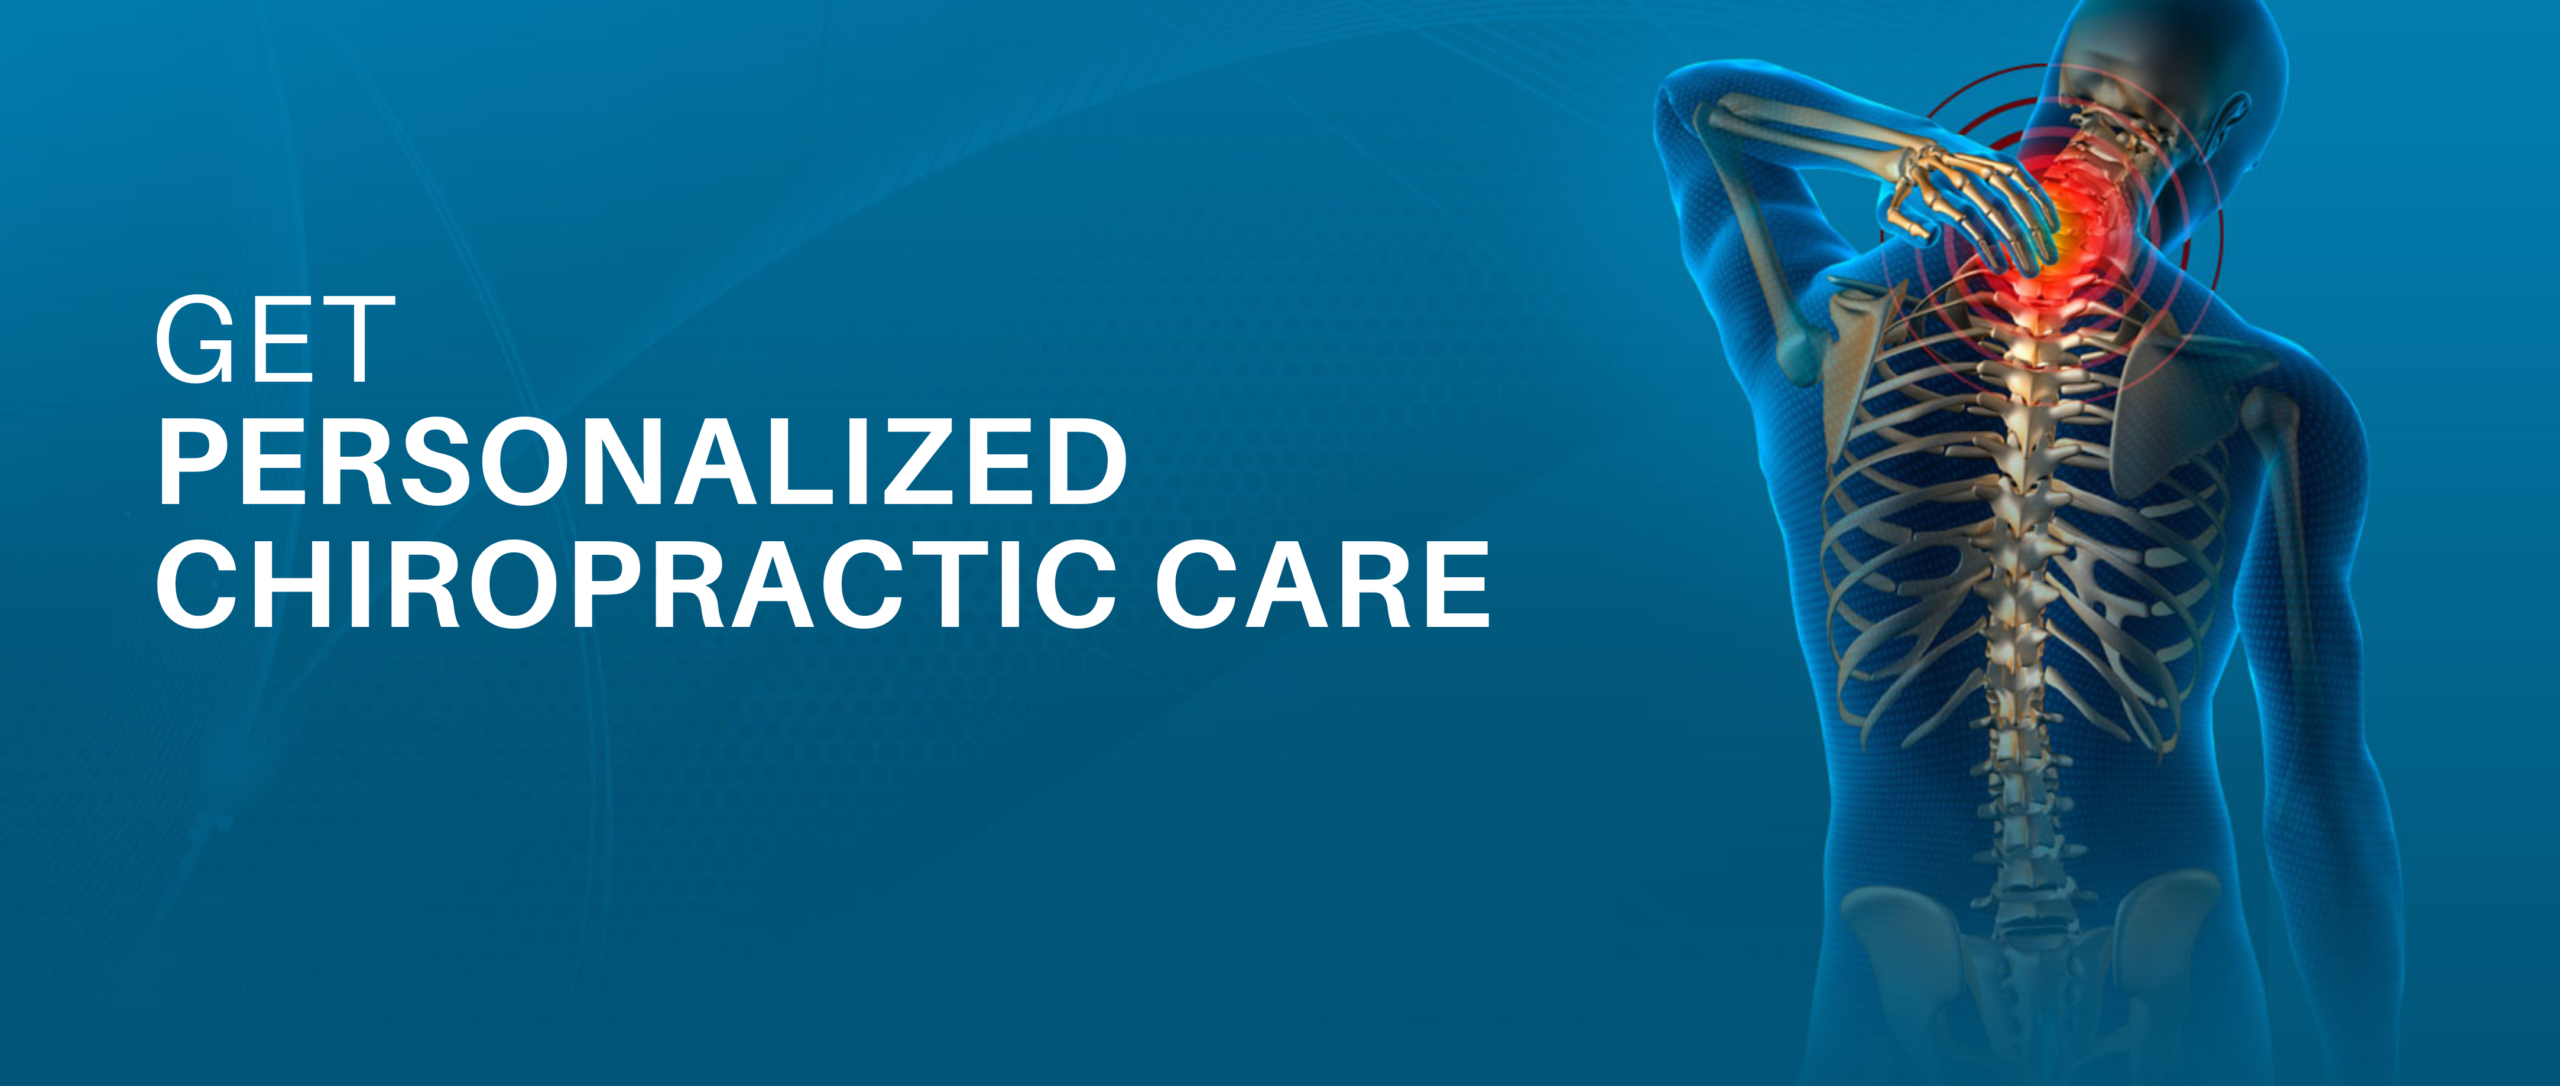 GET PERSONALIZED CHIROPRACTIC CARE